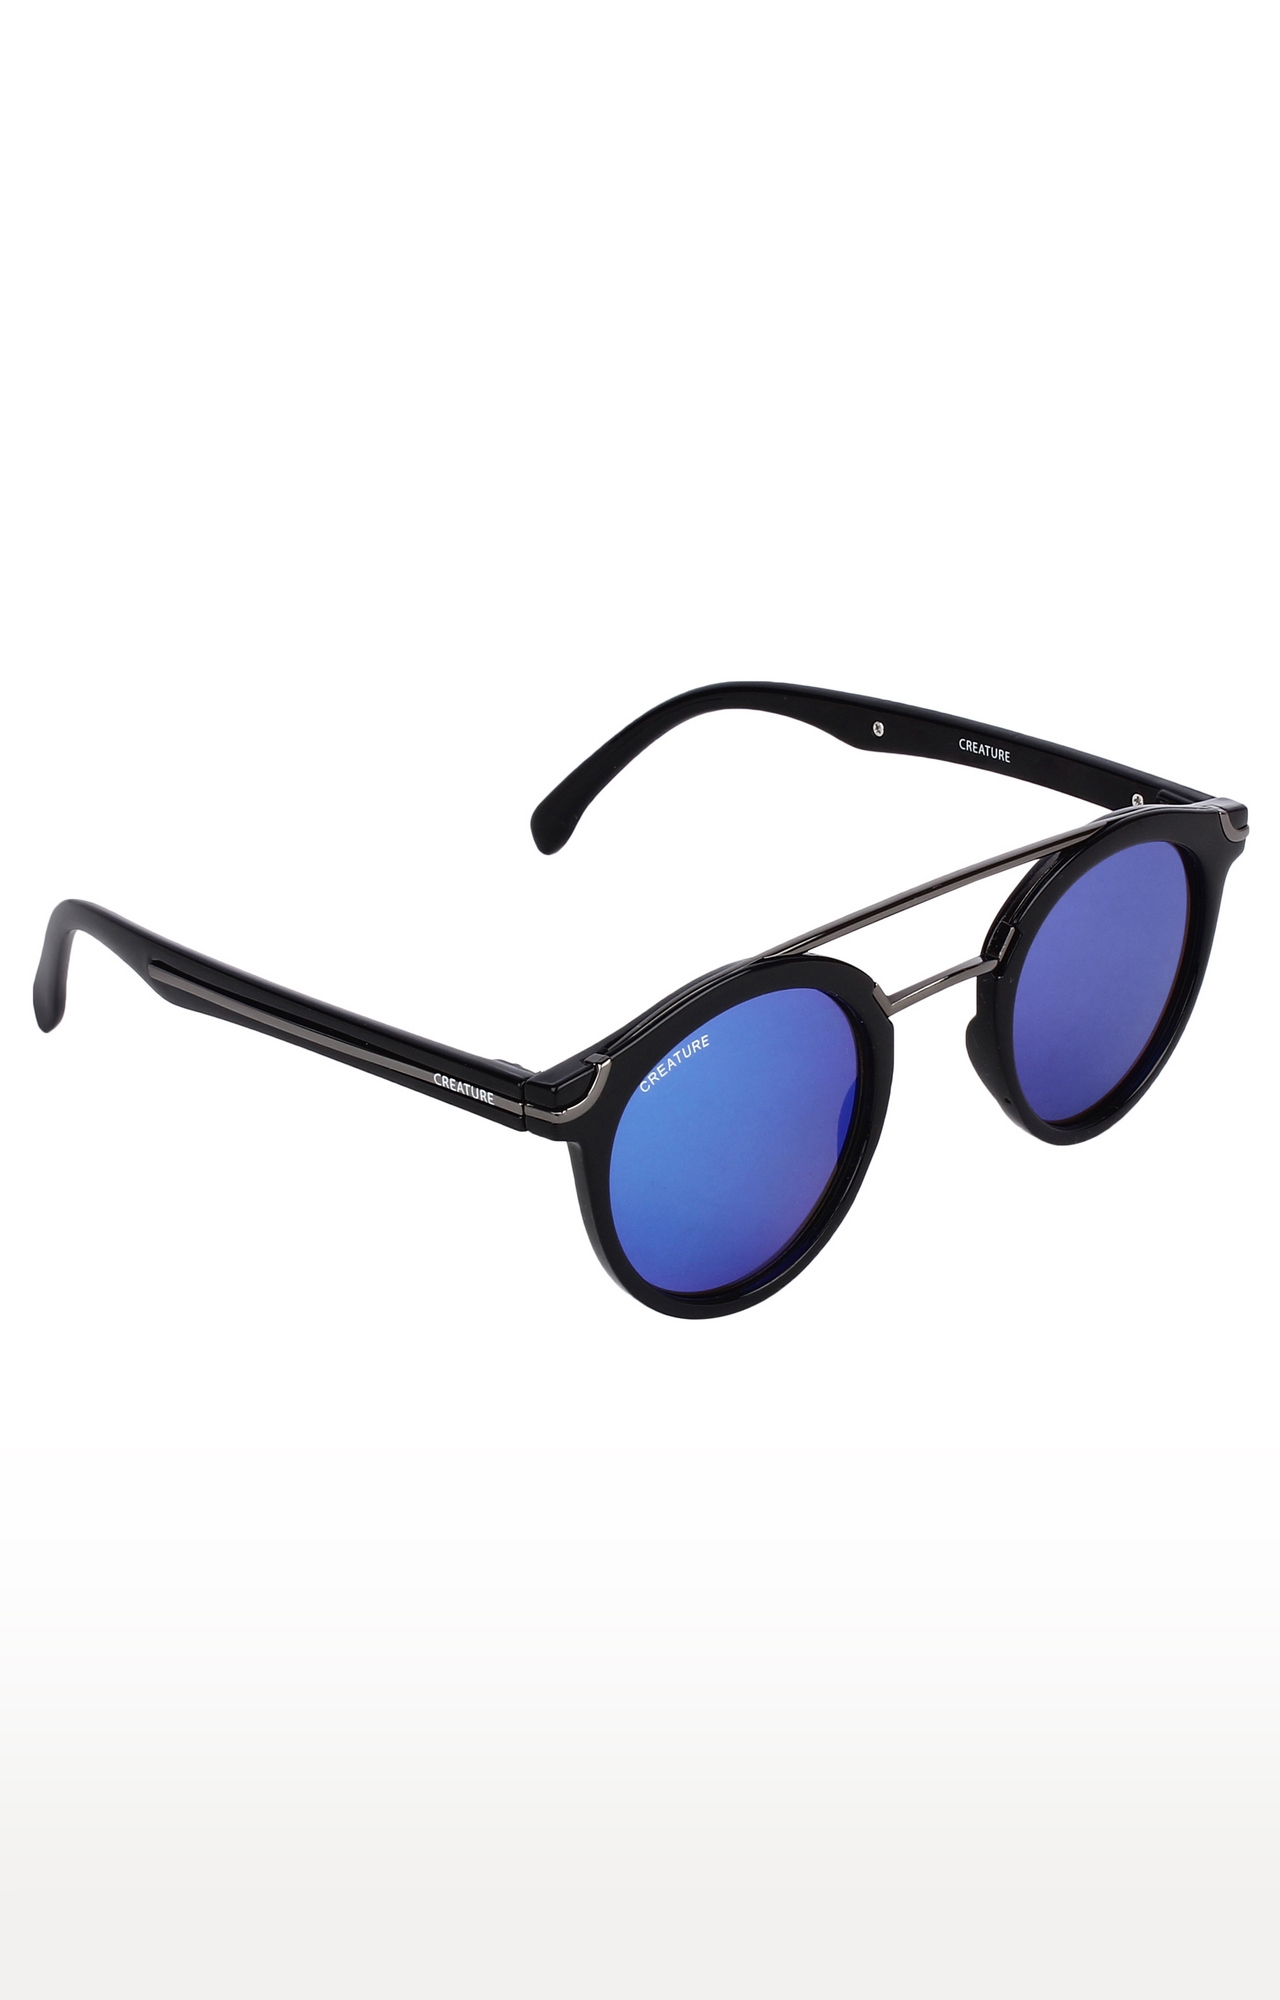 CREATURE | CREATURE Silver Stripped Round Sunglasses (Lens-Blue|Frame-Silver)